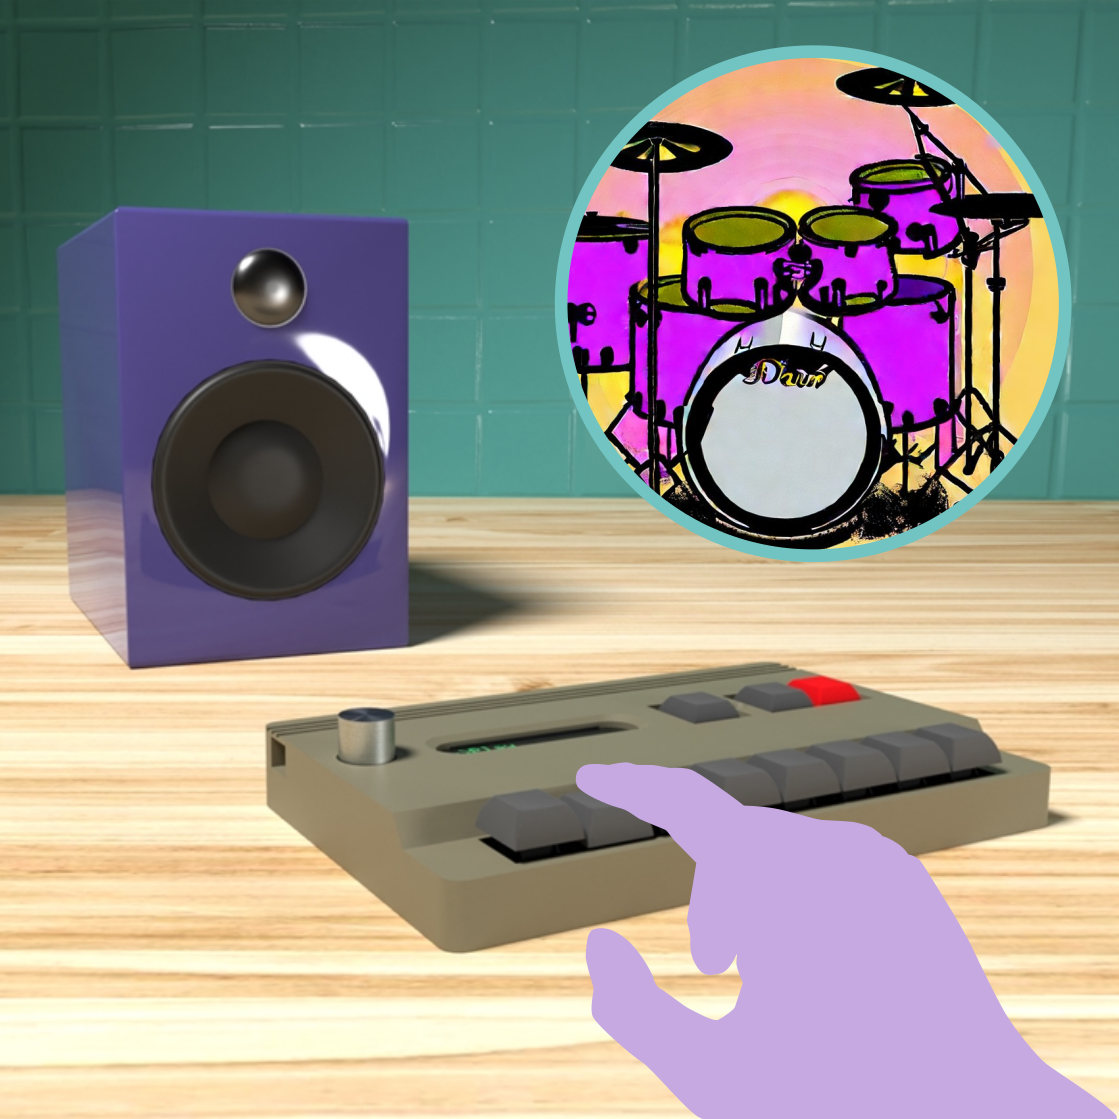 image of SnapBeat, the simple Lo-fi sampler, real time live play function